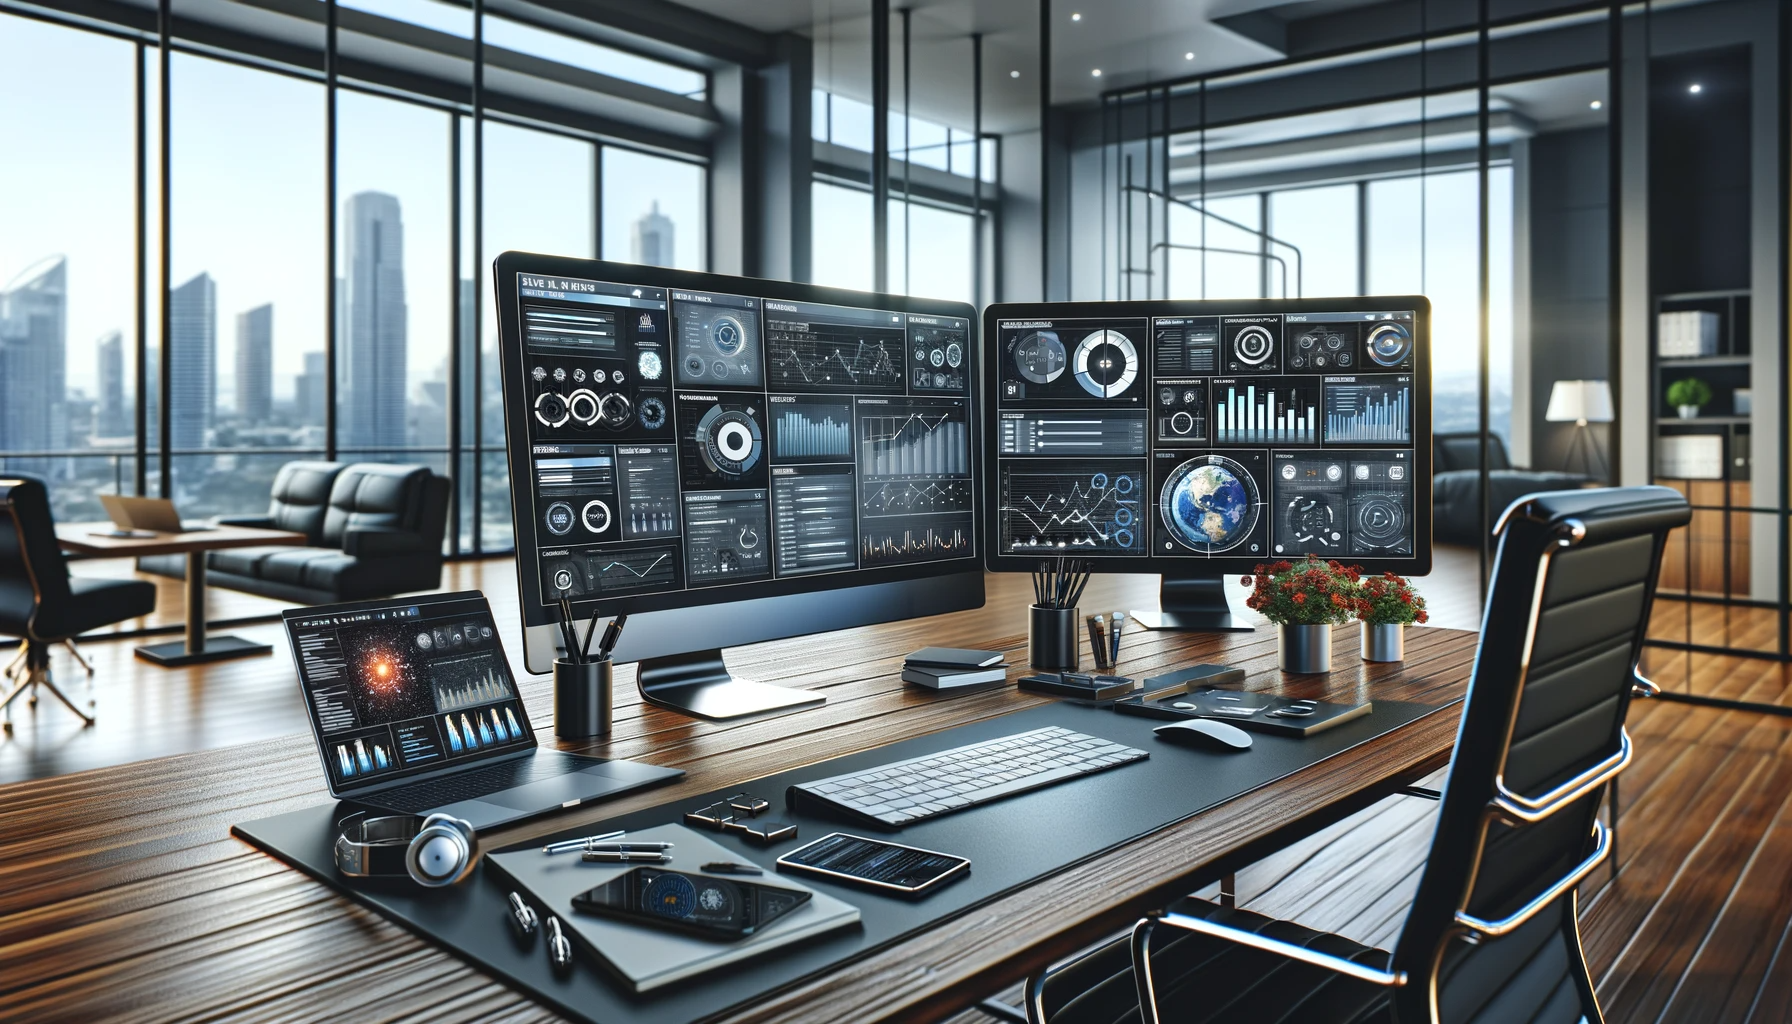 DALL·E 2023-12-19 10.55.16 - A fotorealistic image in wide format, depicting a contemporary office setting focused on Marketing Technologies, without any people. The scene include